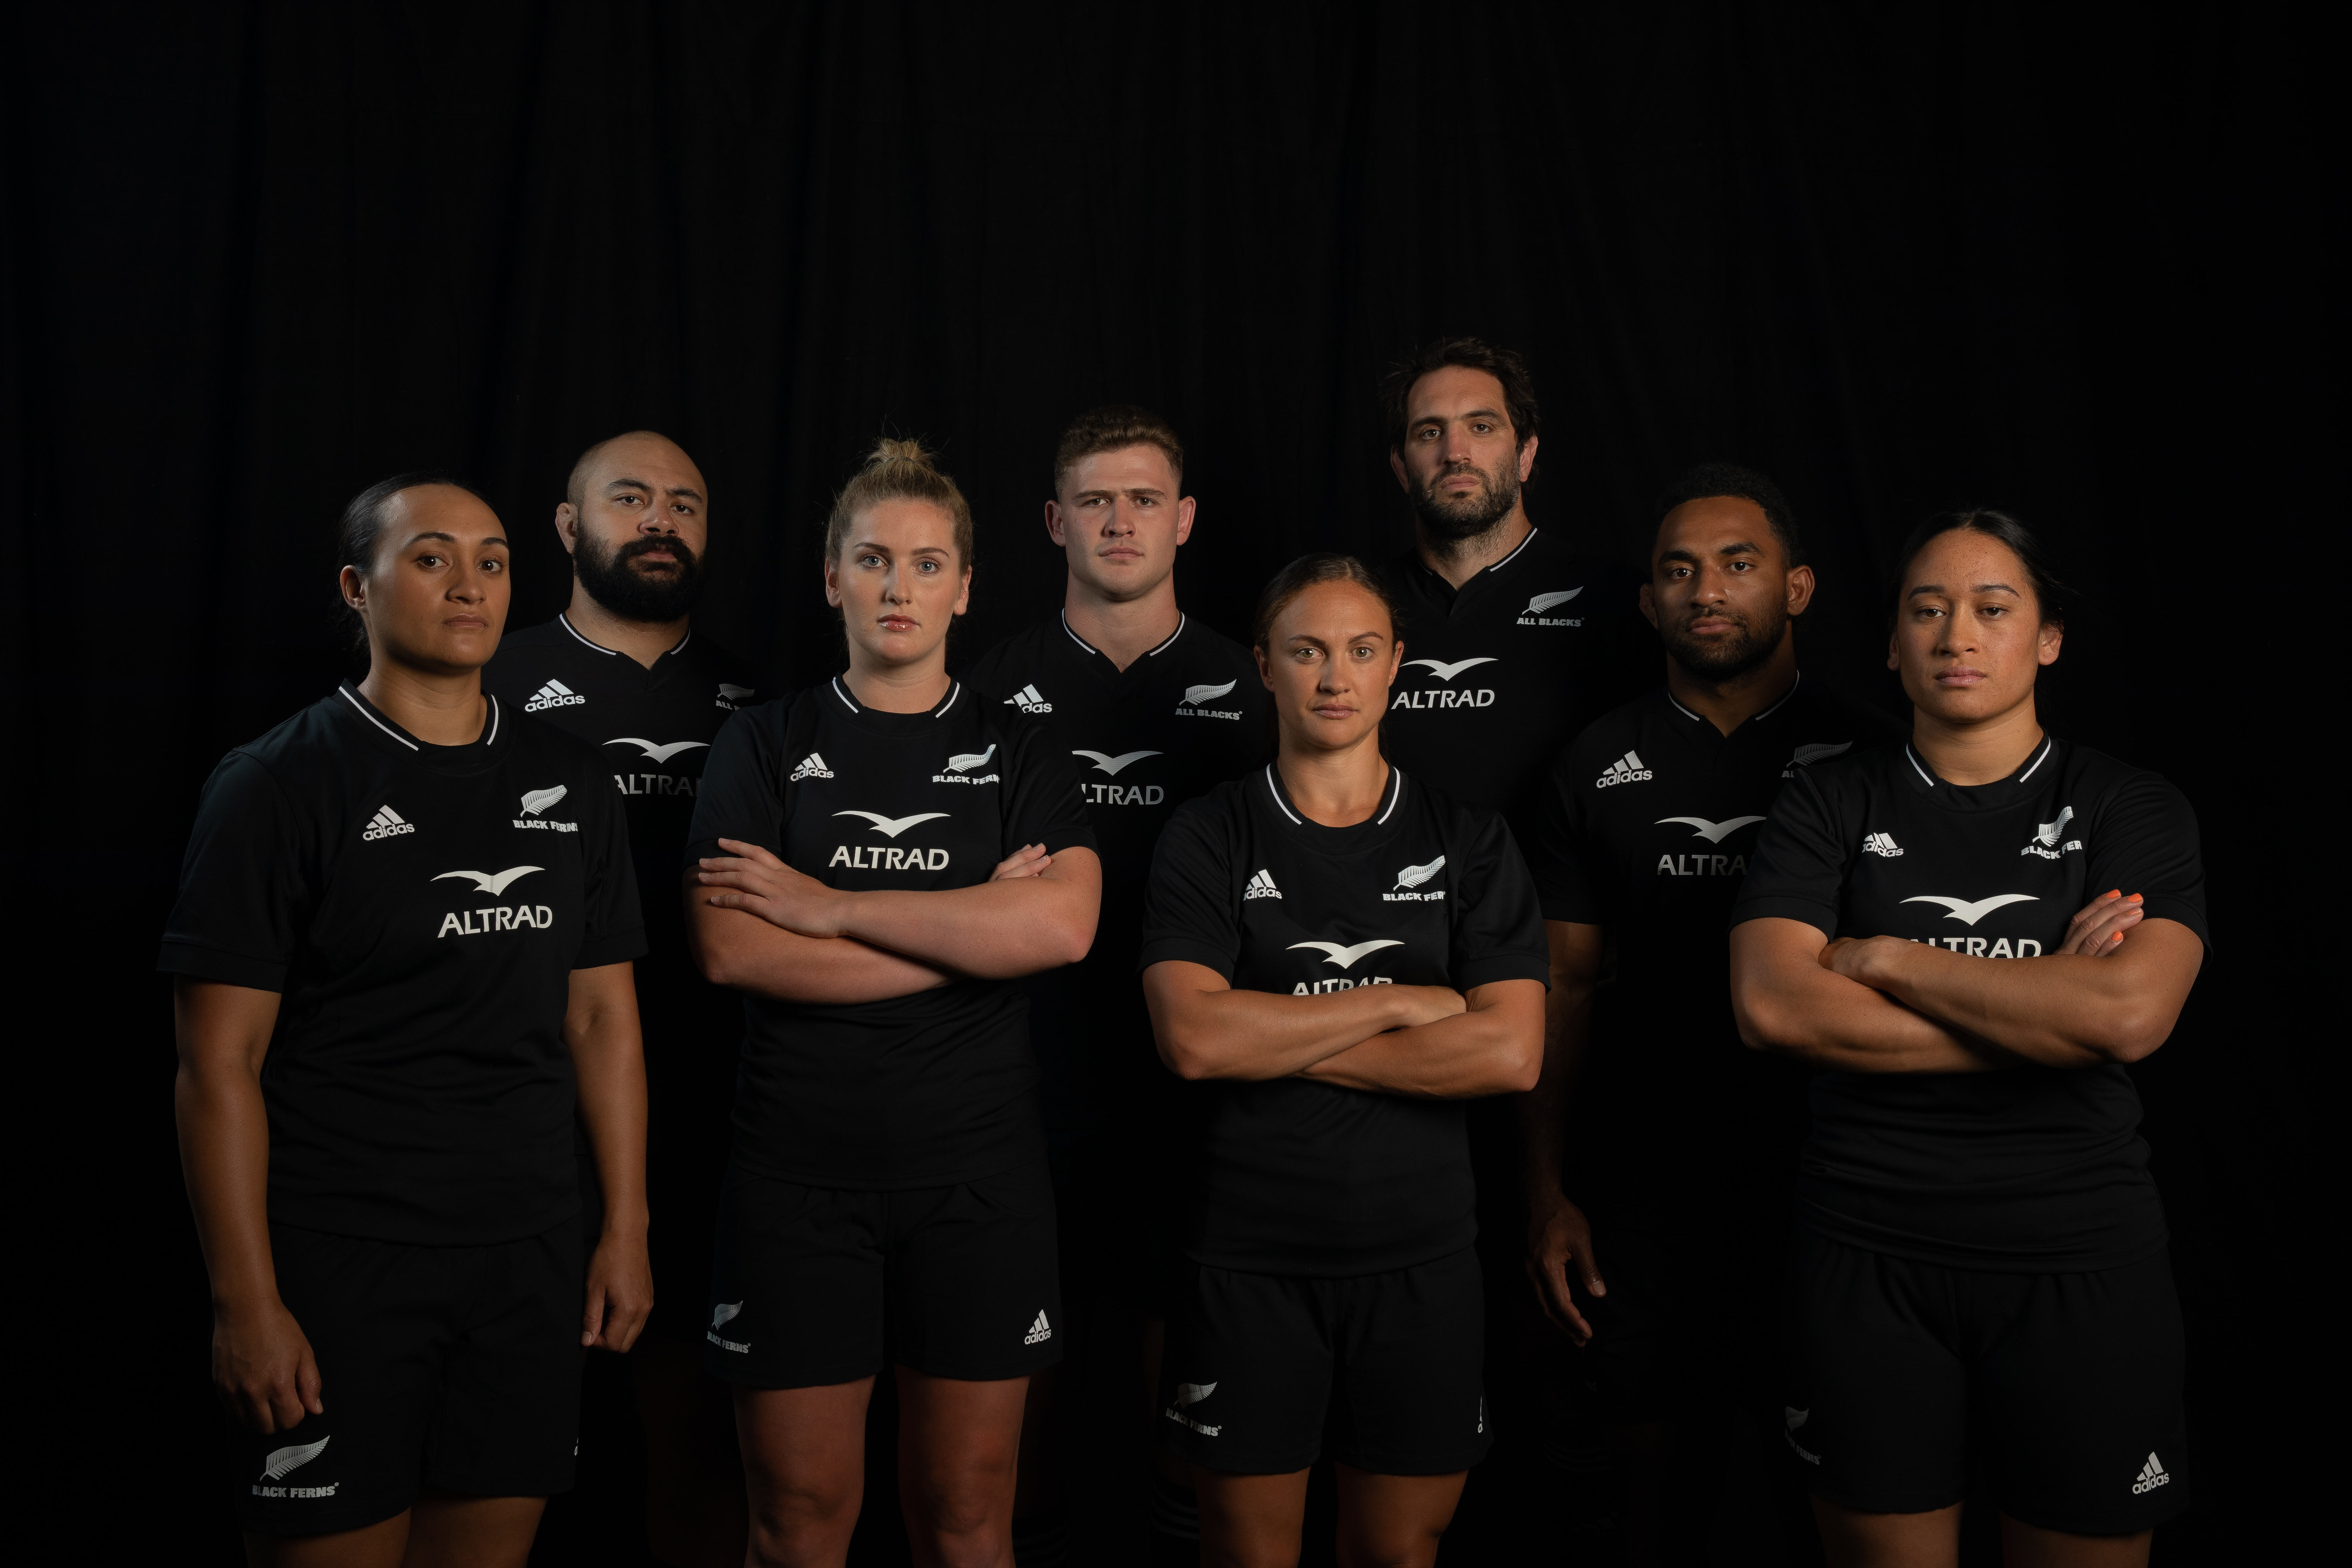 NZR look to the future and renew long-standing partnership with adidas